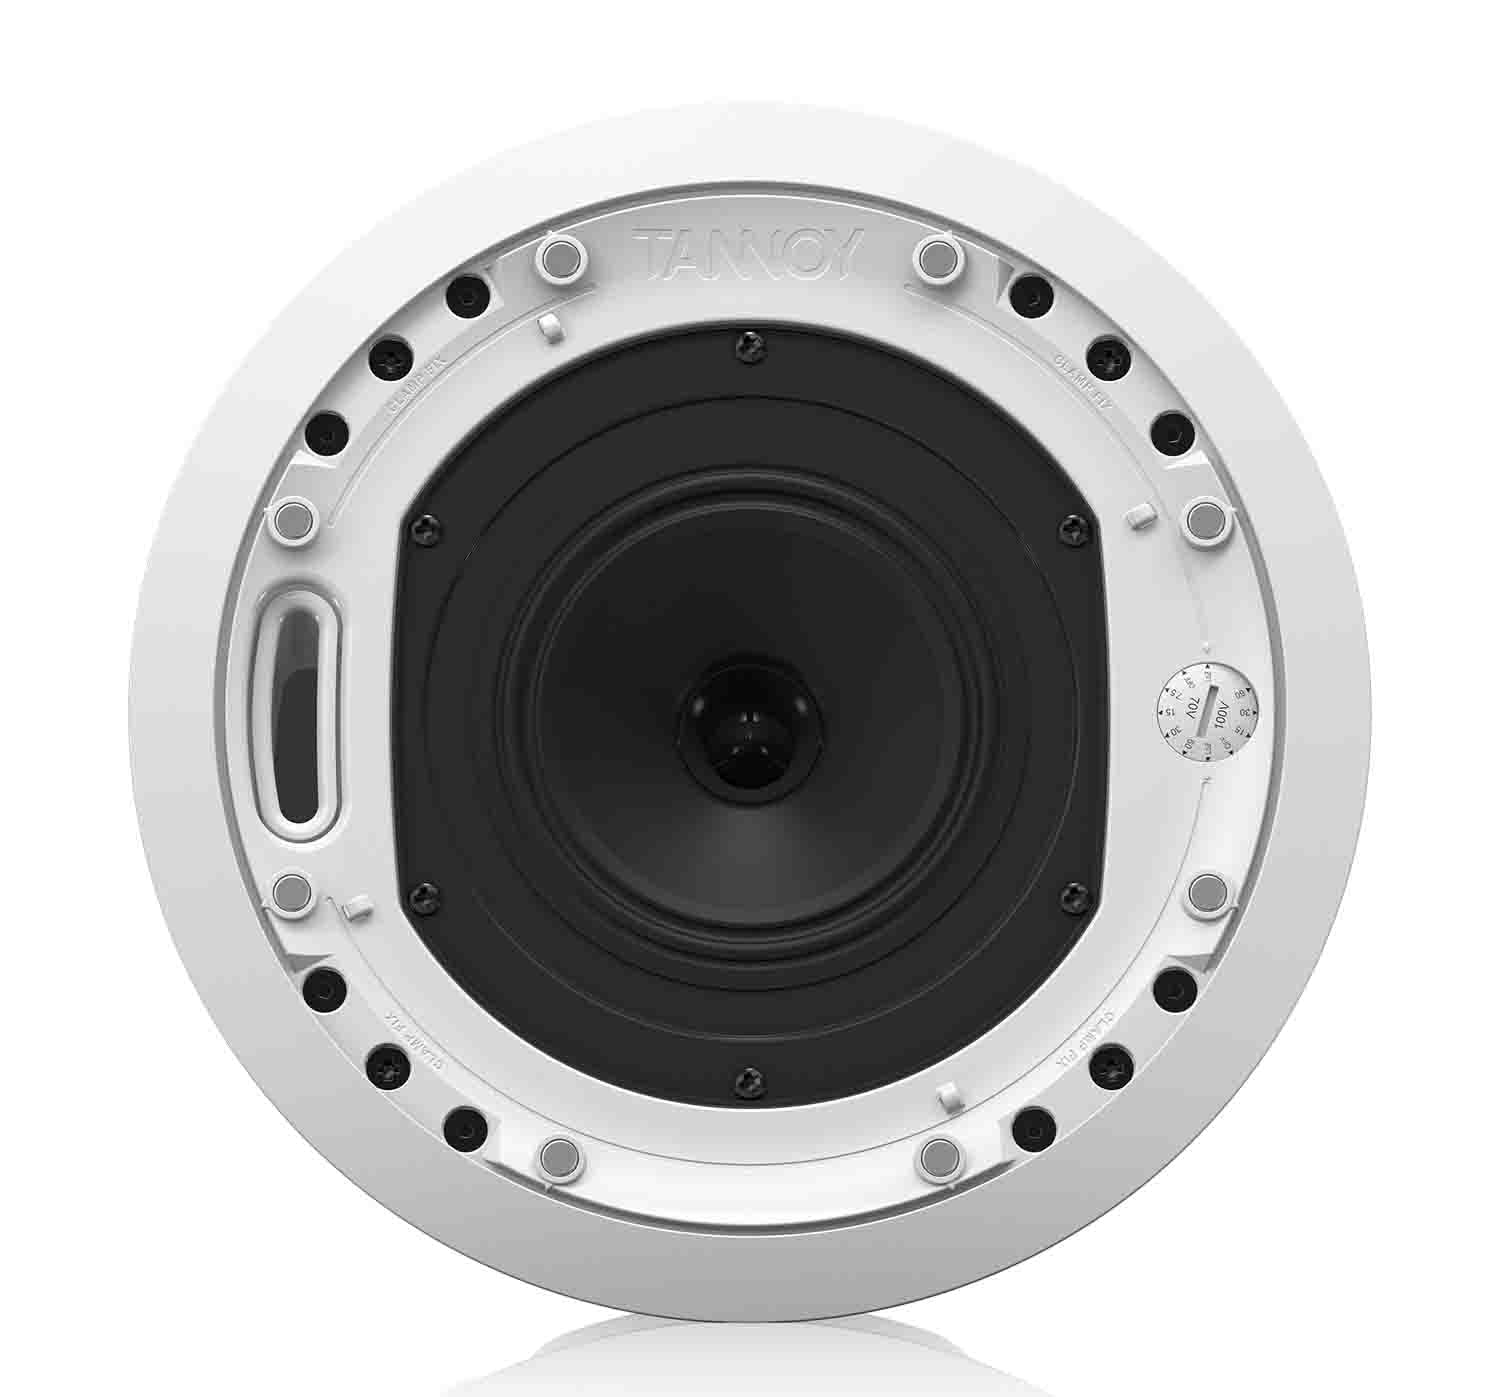 Tannoy CMS 503DC LP, 5-Inch Full Range Ceiling Loudspeaker with Dual Concentric Driver - Low Profile - Hollywood DJ